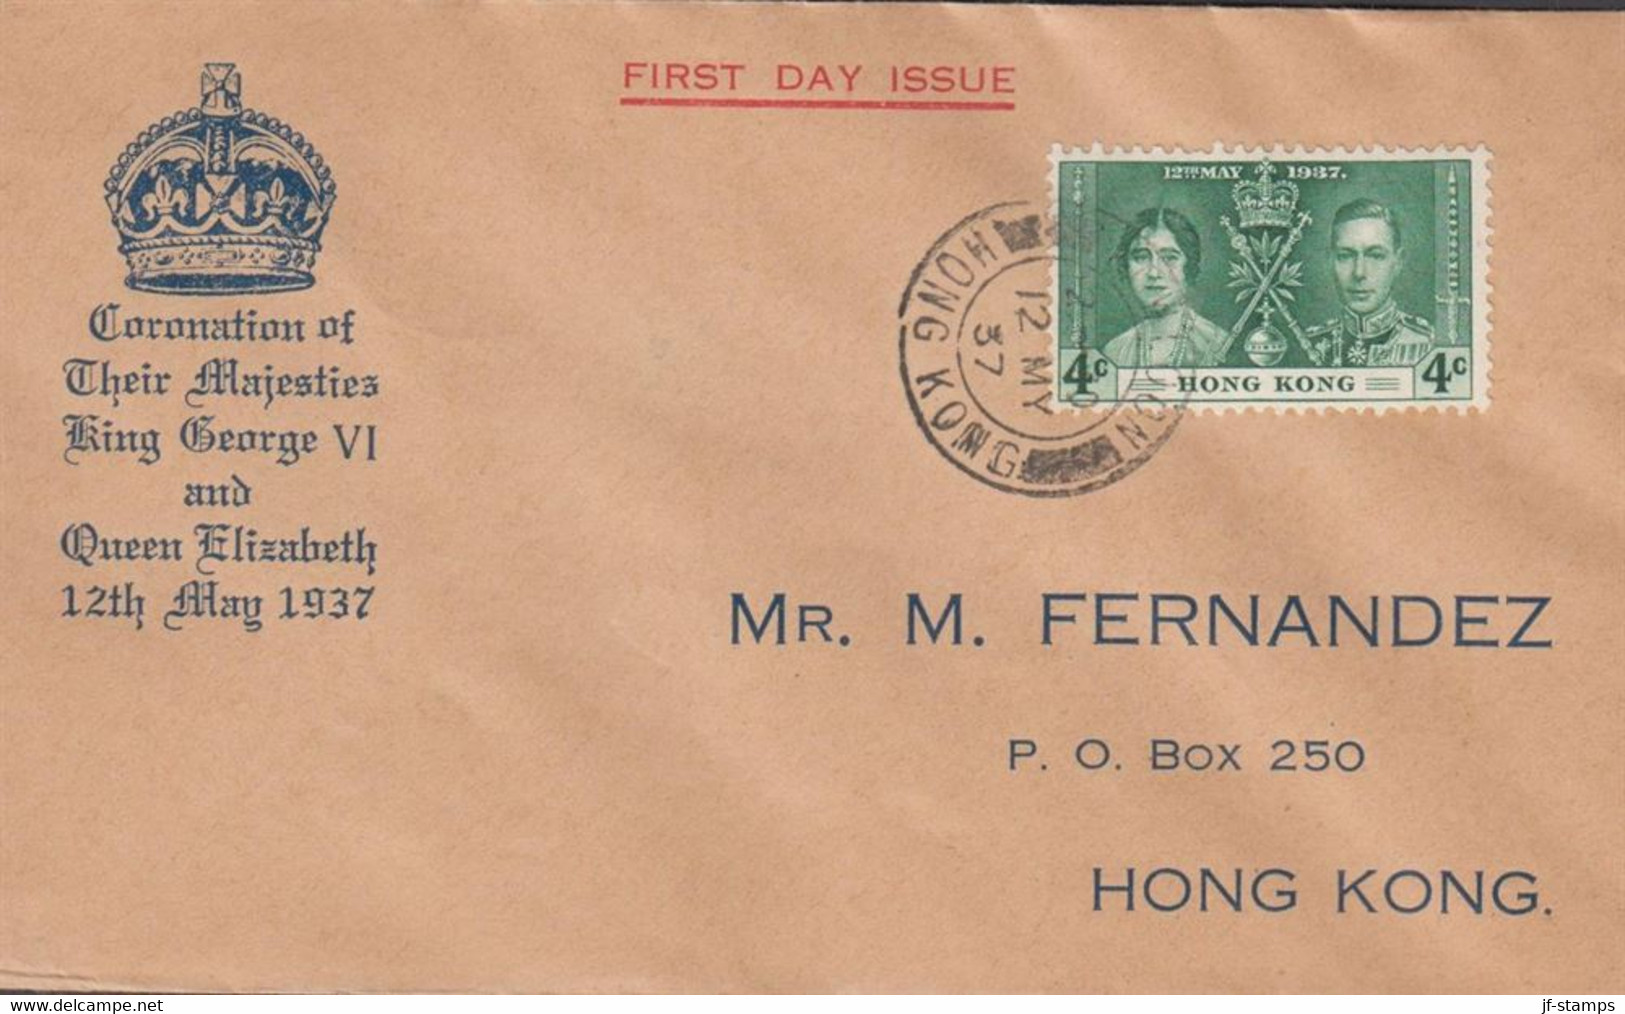 1937. HONG KONG Georg VI. 4 C Coronation On Nice FDC Cancelled FIRST DAY OF ISSUE KOWLOON HON... (Michel 136) - JF427050 - Cartas & Documentos